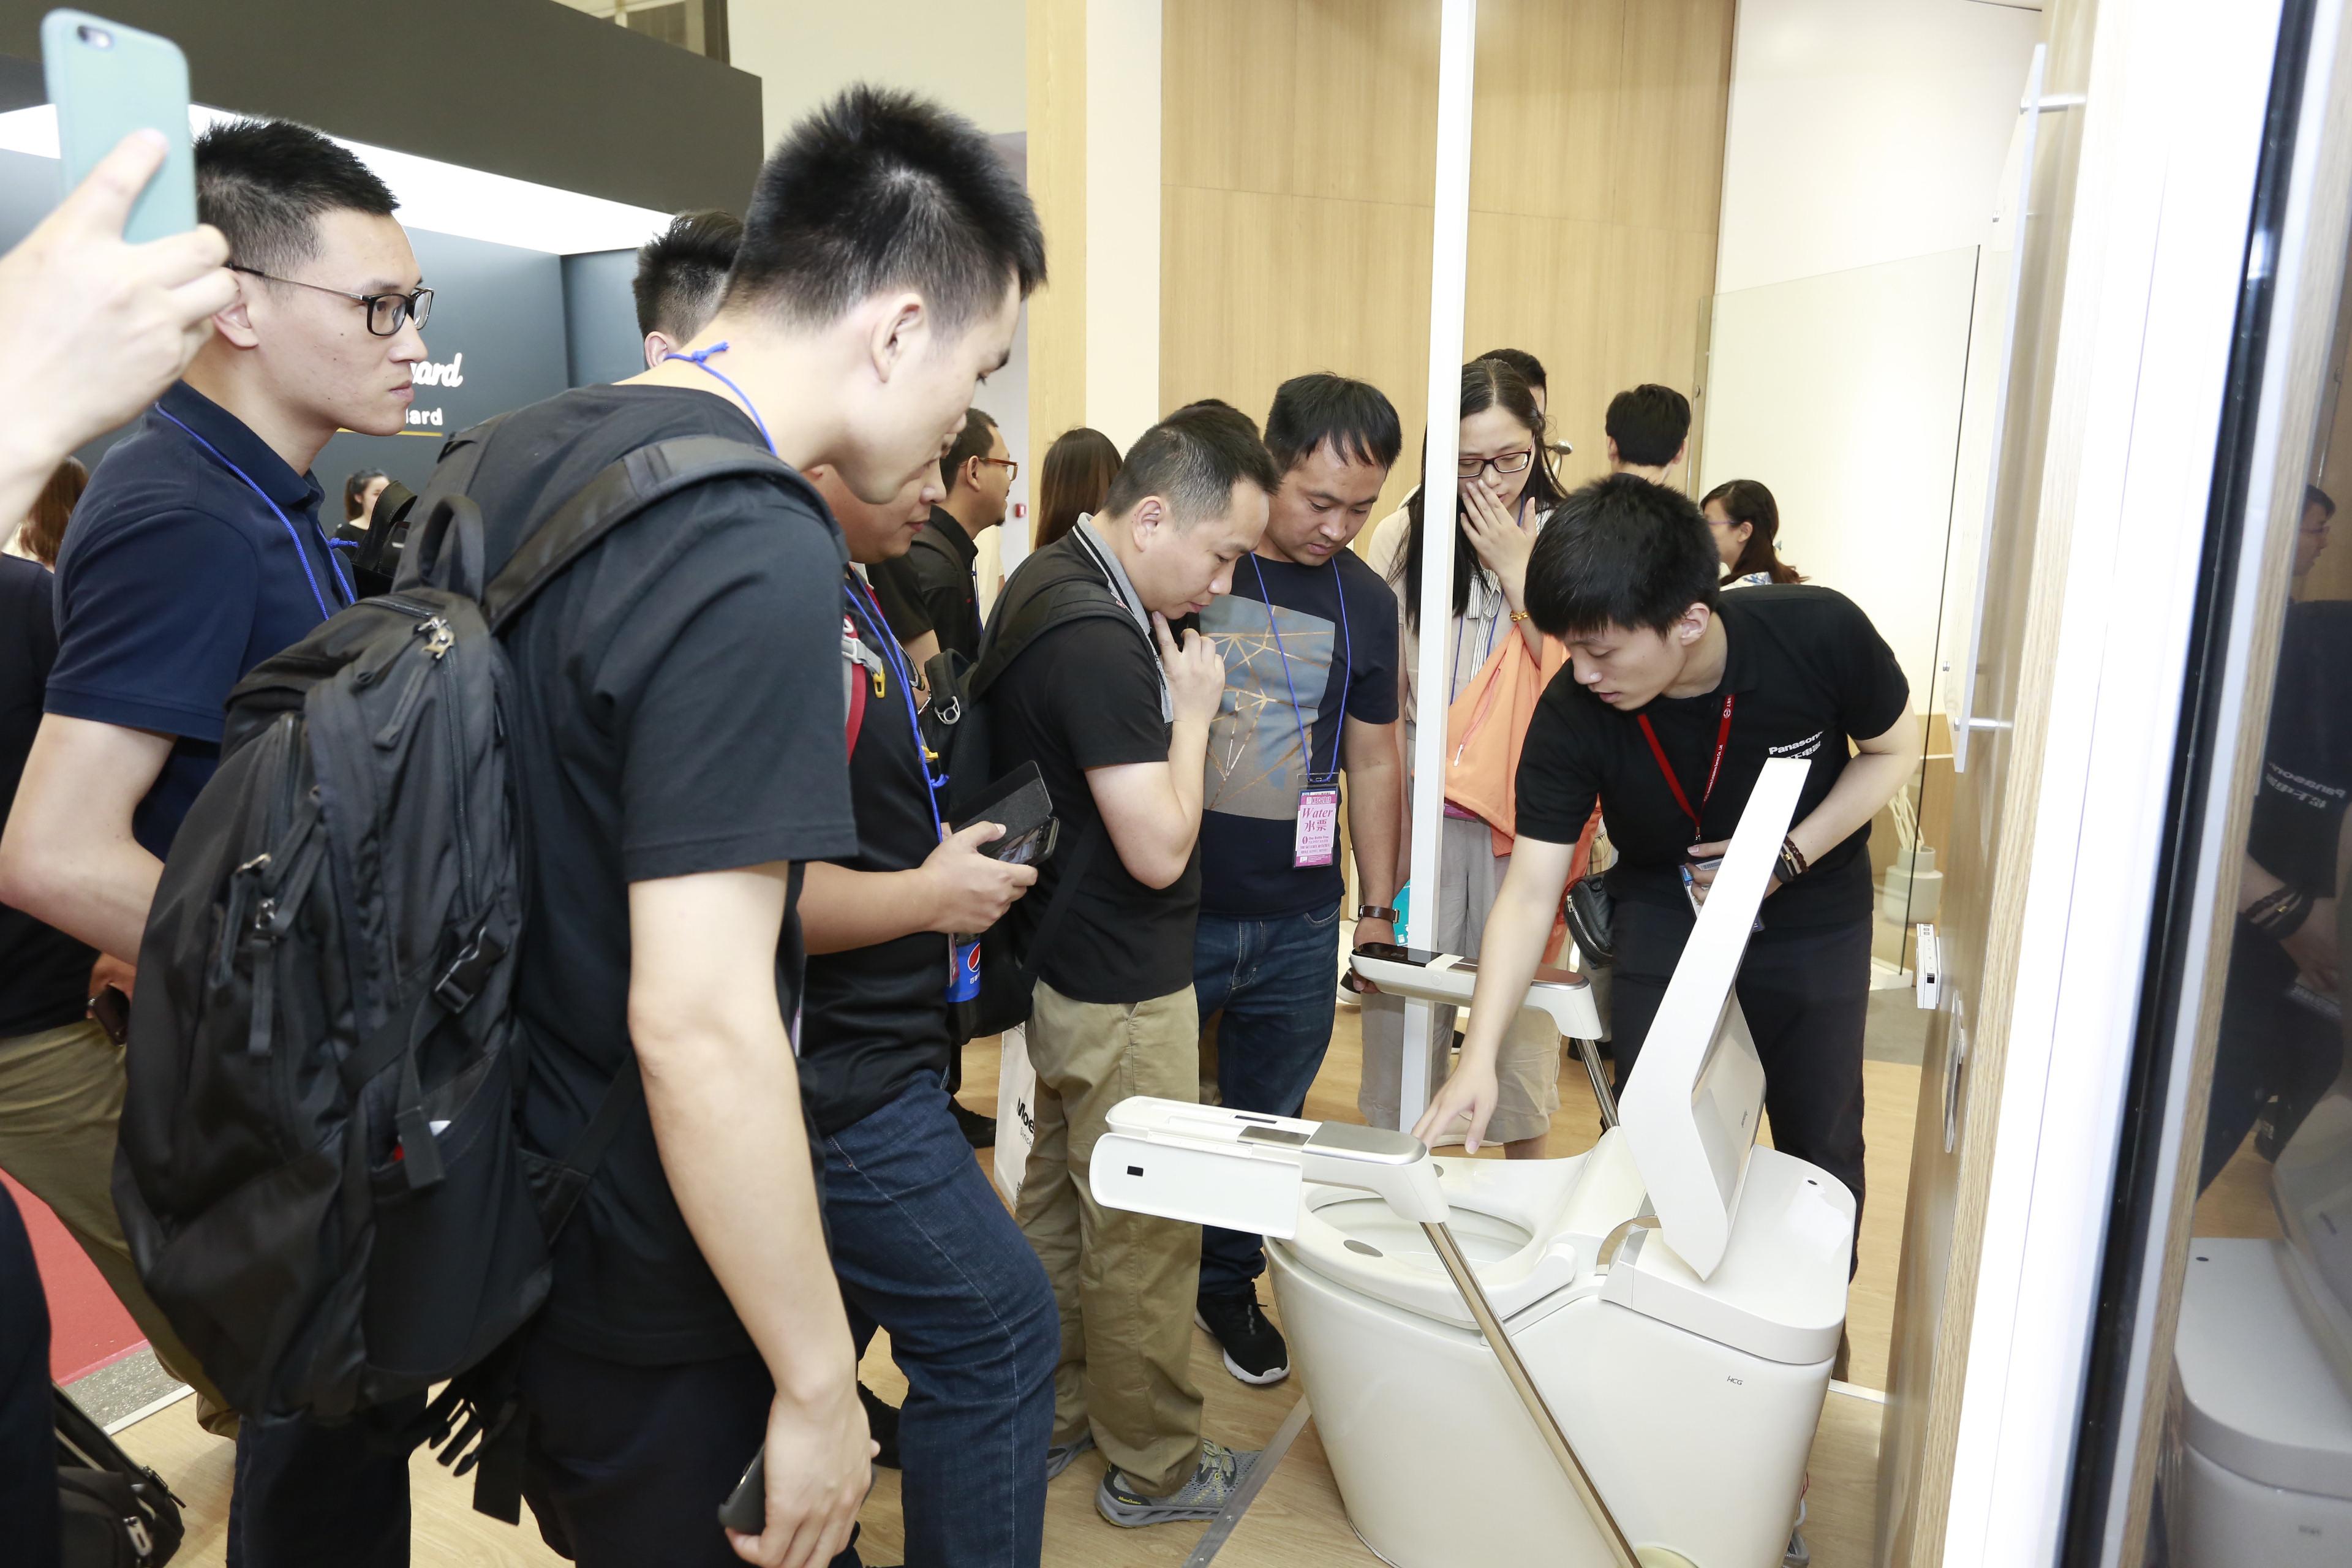 photo: Explaining about Panasonic all-in-one medical check-up equipment aｔ KBC 2018